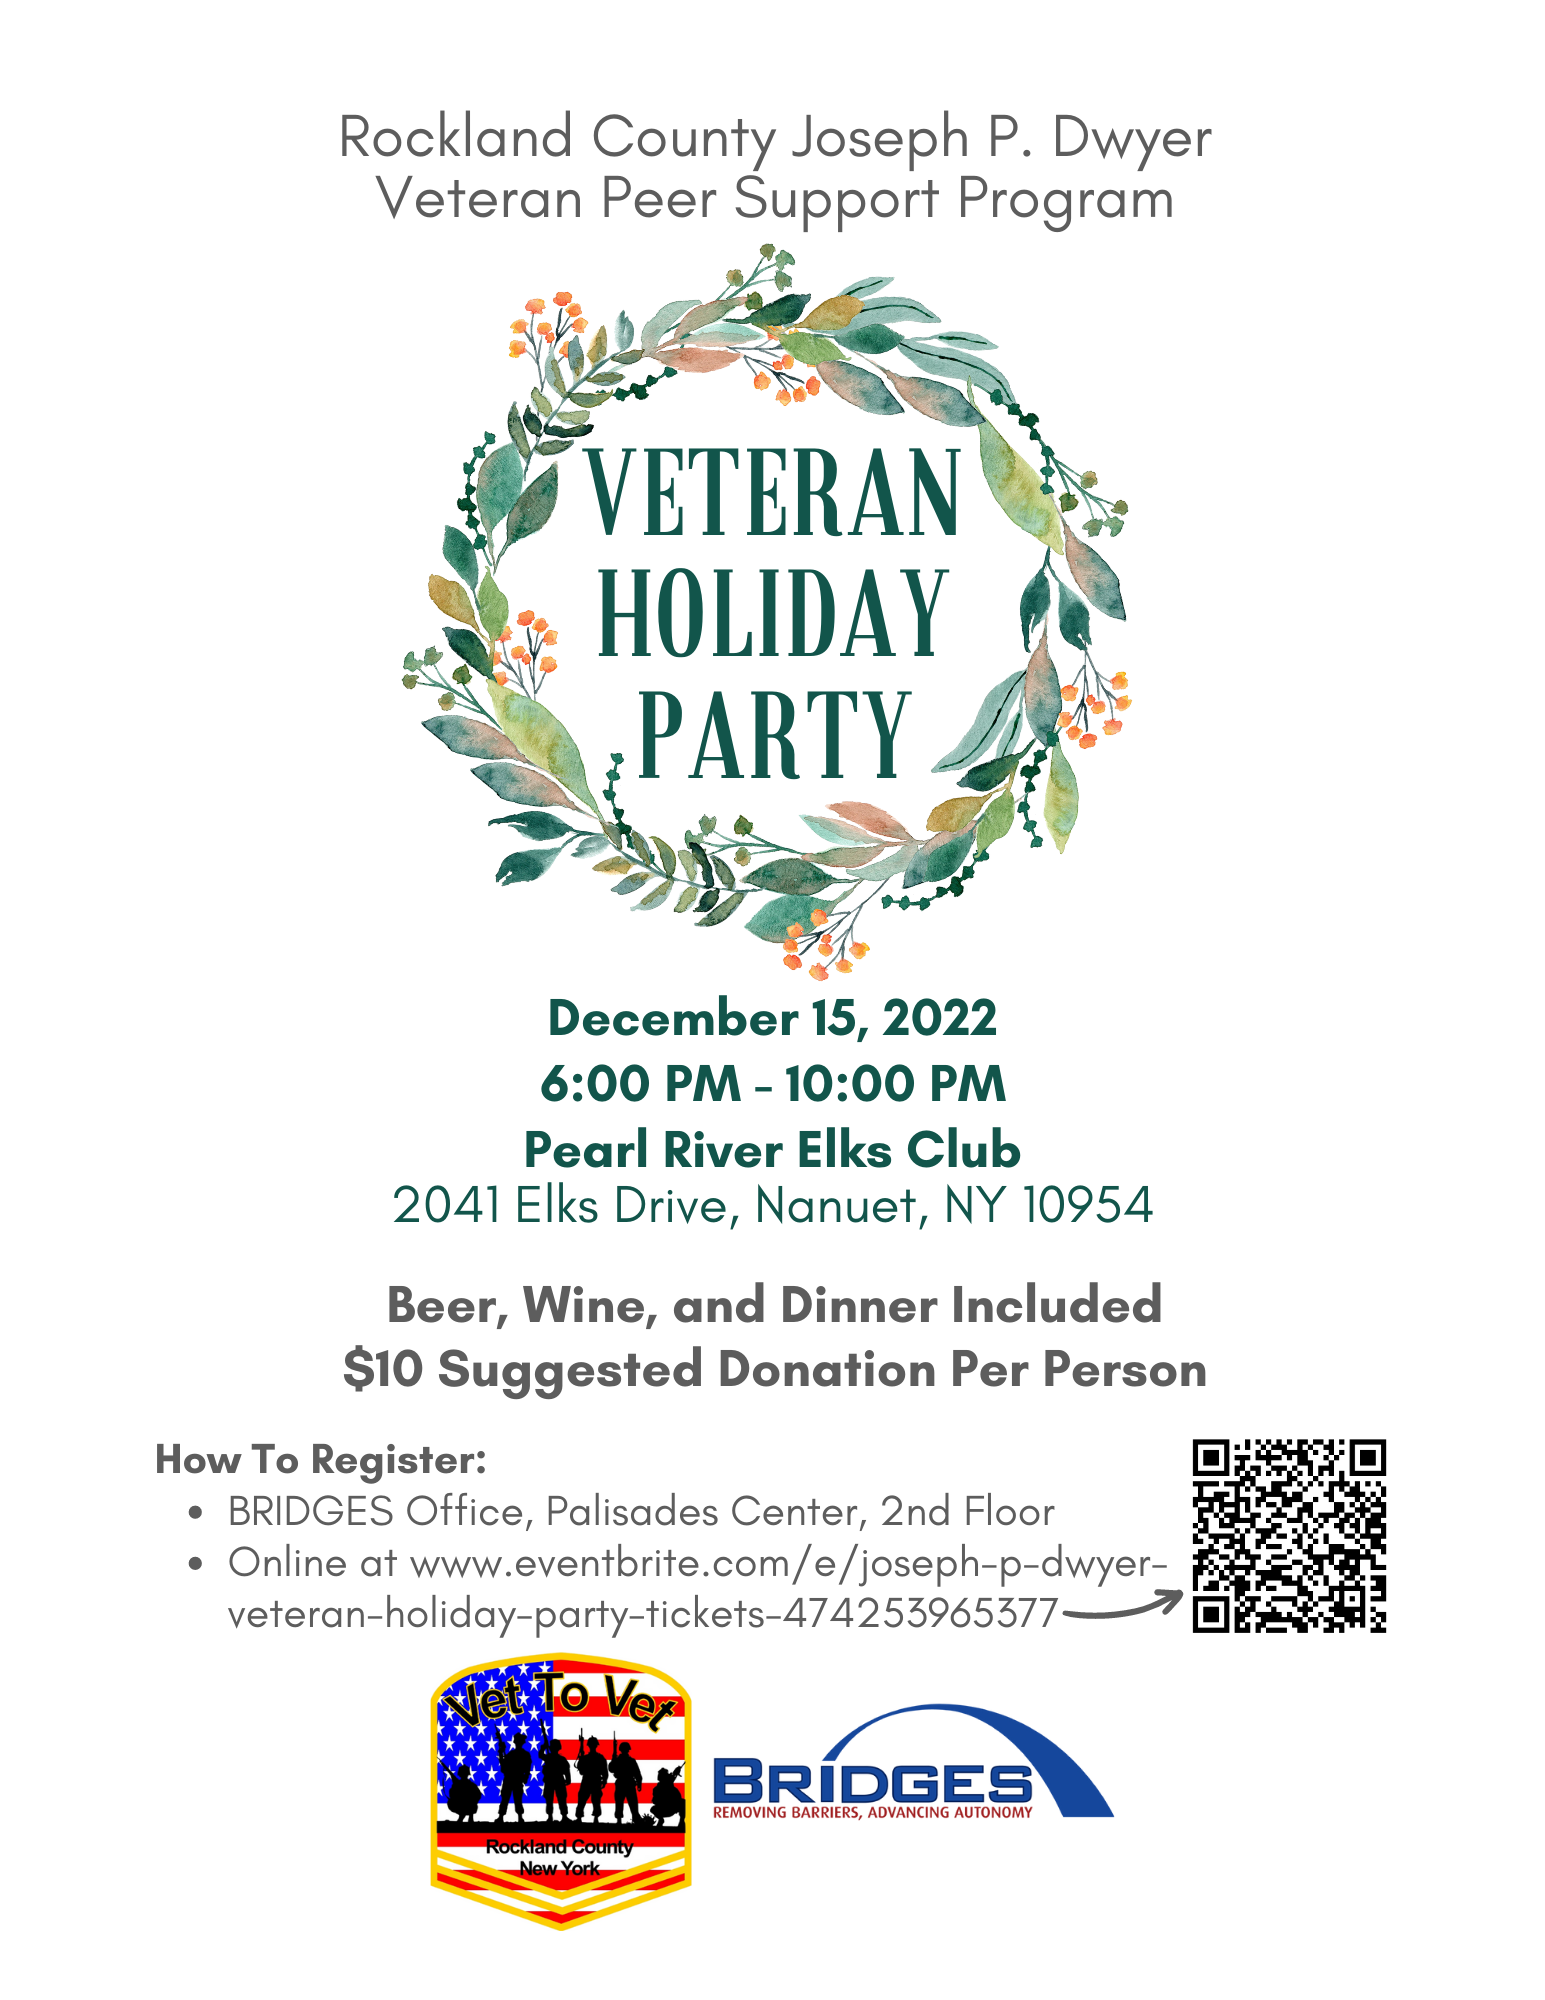 Rockland County Joseph P. Dwyer Veteran Peer Support Program Veteran Holiday Party. December 15, 2022. 6 PM to 10 PM, Pearl River Elks Club, 2041 Elks Drive, Nanuet, NY 10954. Beer, wine, and dinner included. $10 suggested donation per person. How to register: BRIDGES office, Palisades Center, 2nd Floor. Online at eventbrite.com.